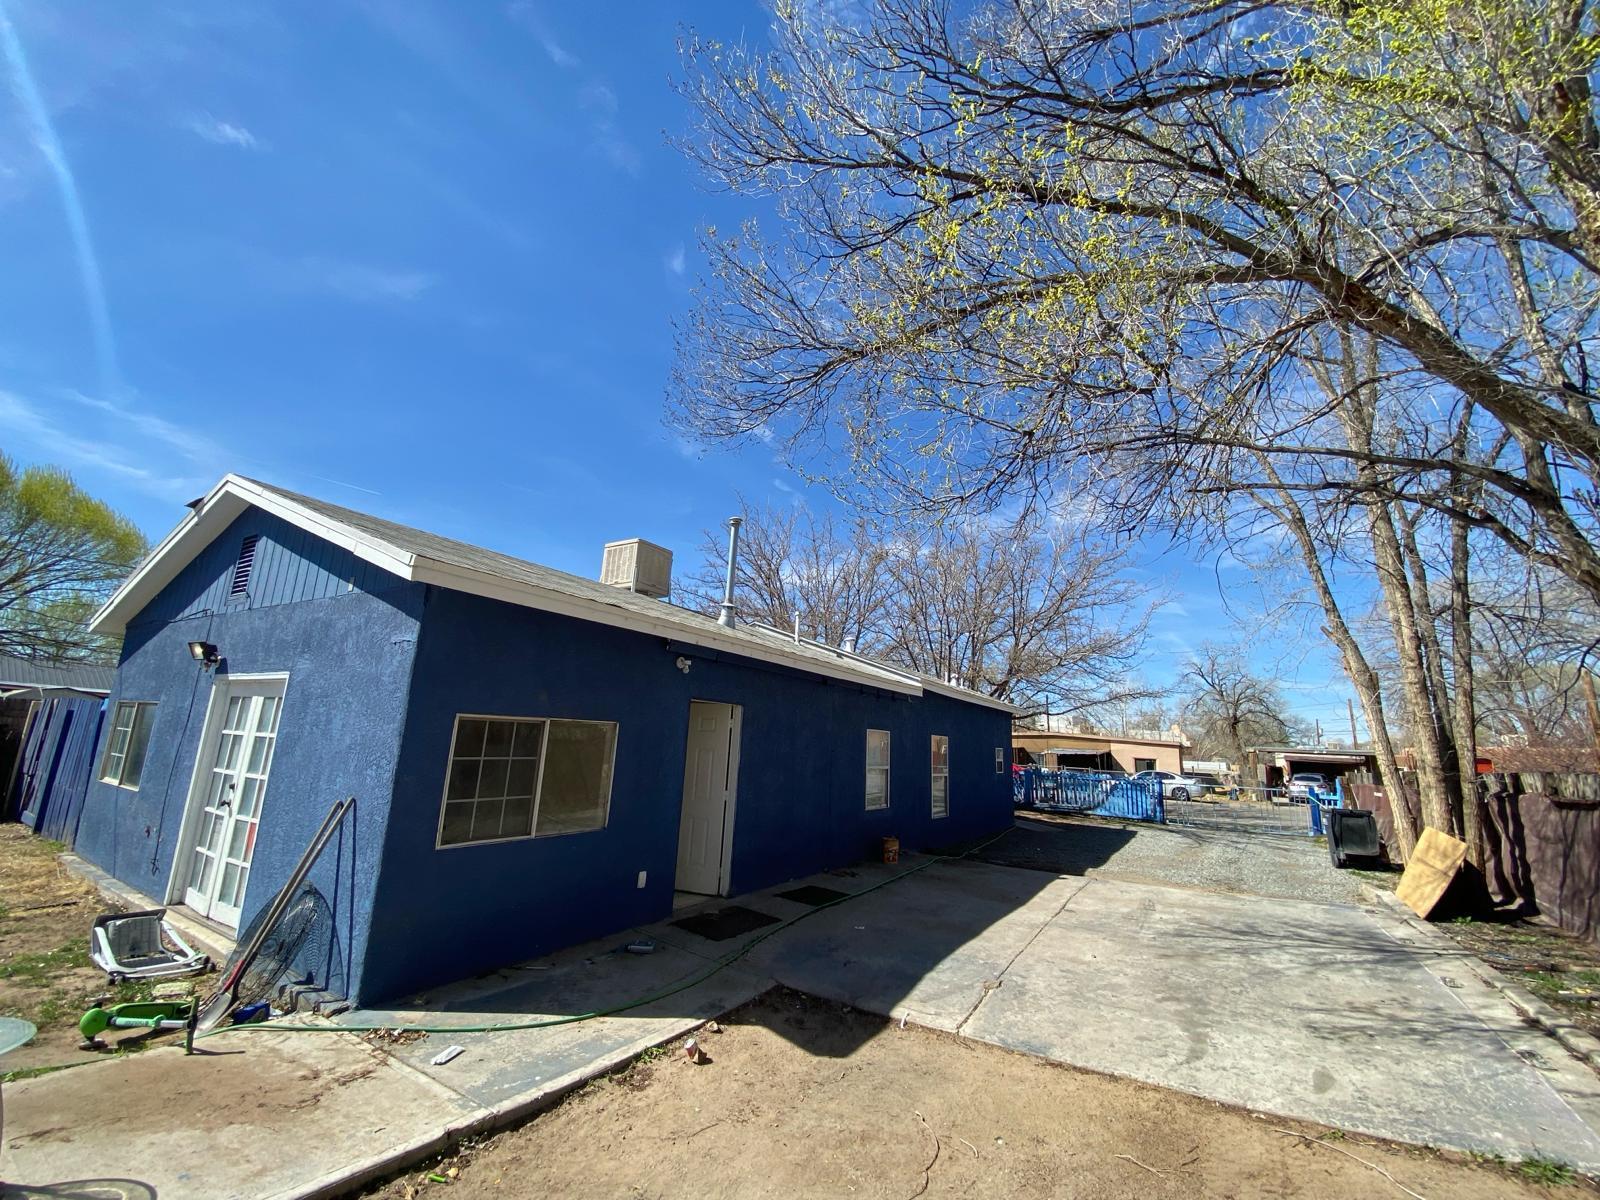 Nice home in the SW with 2-3 br, 1ba. Big yard with access to the back, new painting, fascia, flooring, swamp cooler, and much more, seller will consider a REC at 240,000 purchase price with 20% down payment, monthly P&I 1,902.00, for more info contact agent